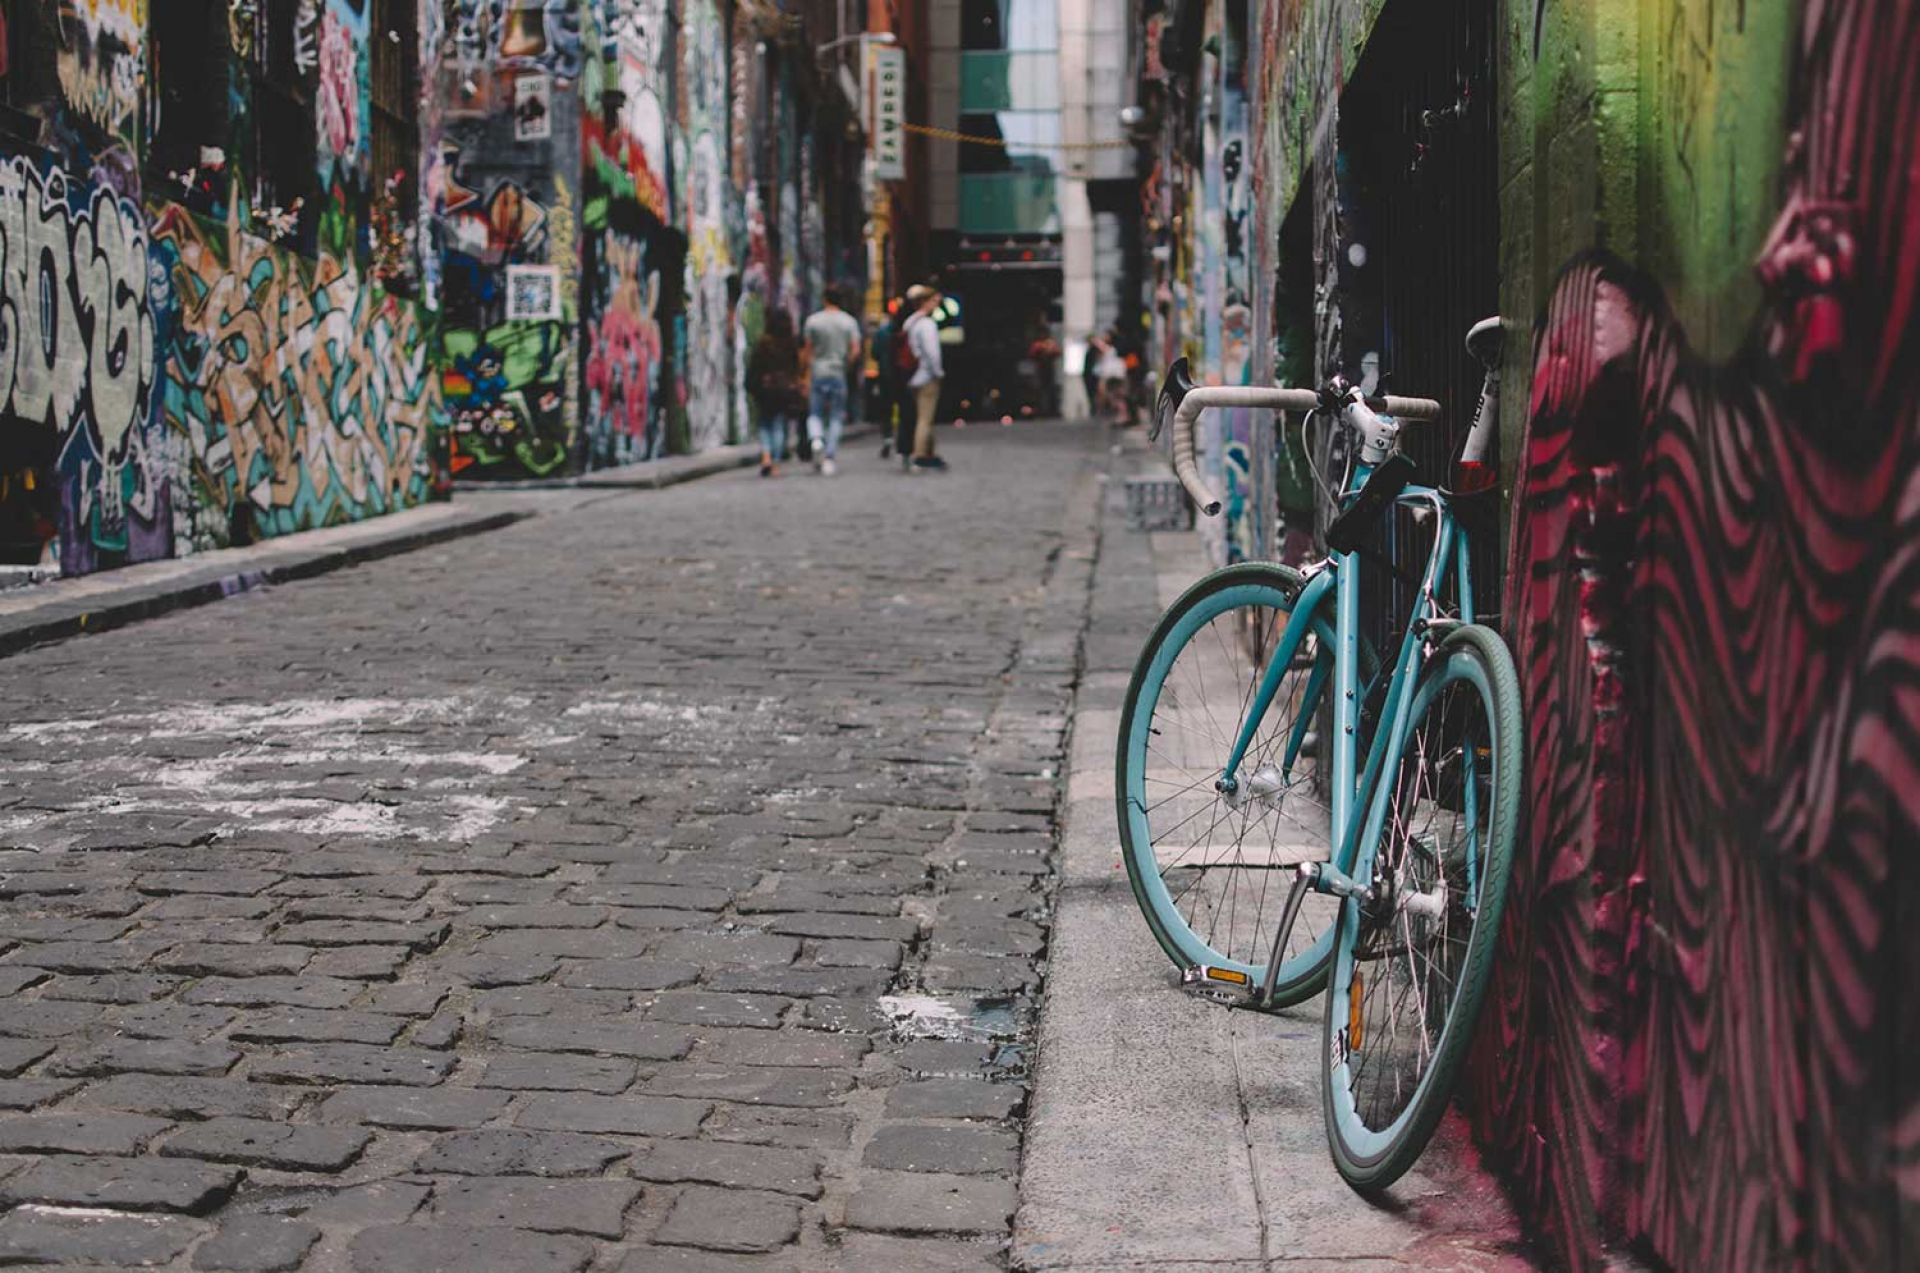 Green bicycle in the foreground of a photo of the graffiti art space, Hosier Lane